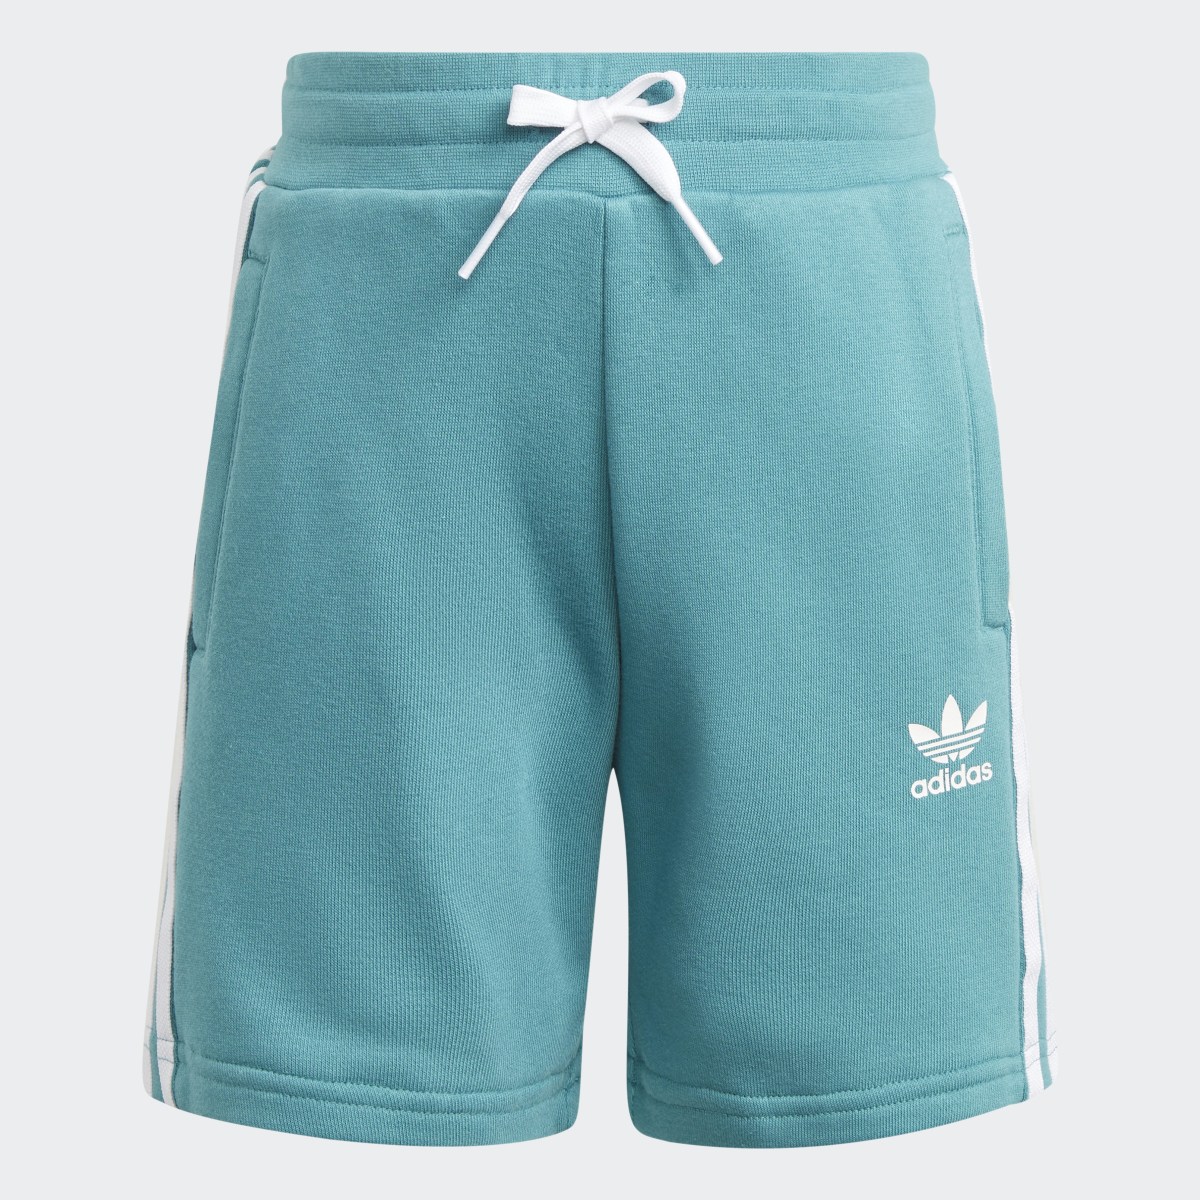 Adidas Completo adicolor Shorts and Tee. 7